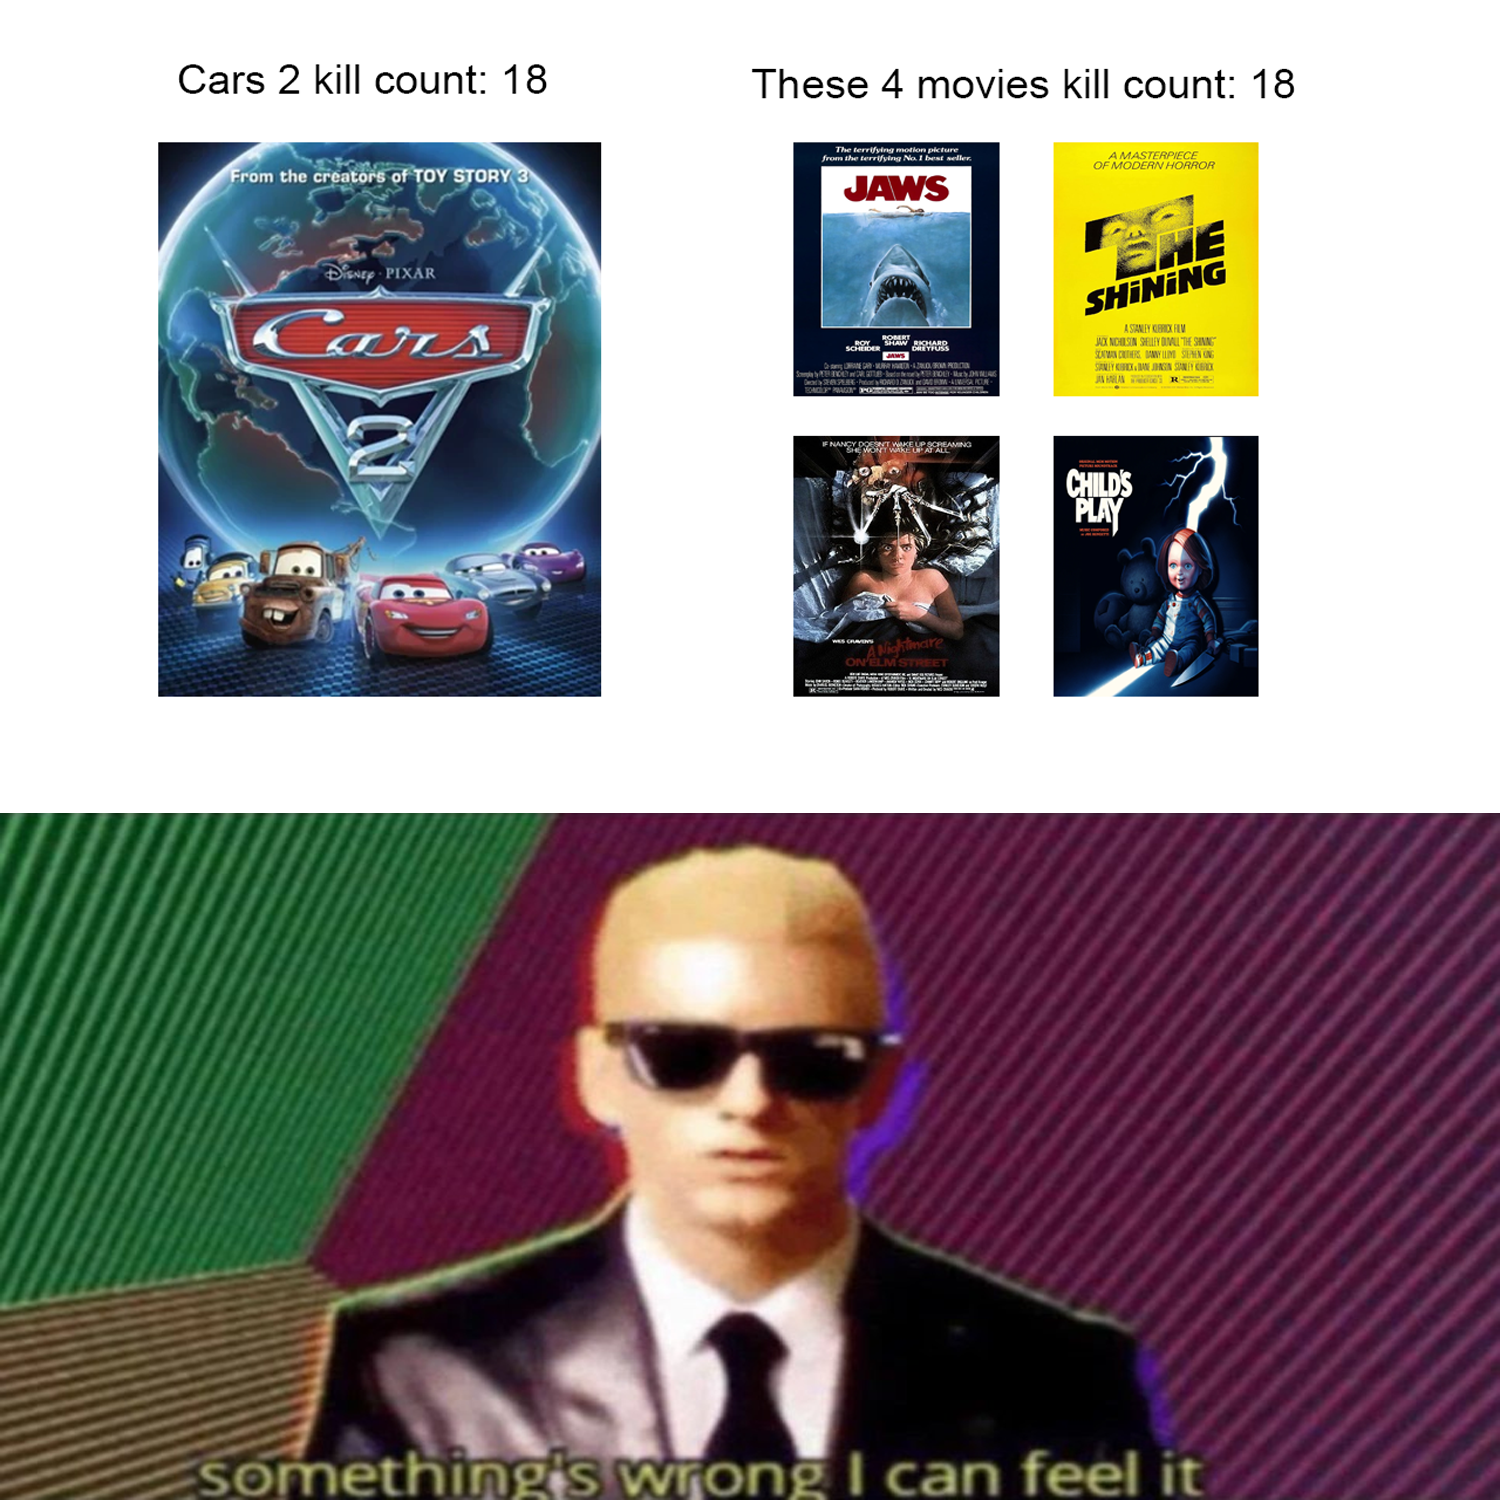 Yet Cars 2 was a G-rated film.